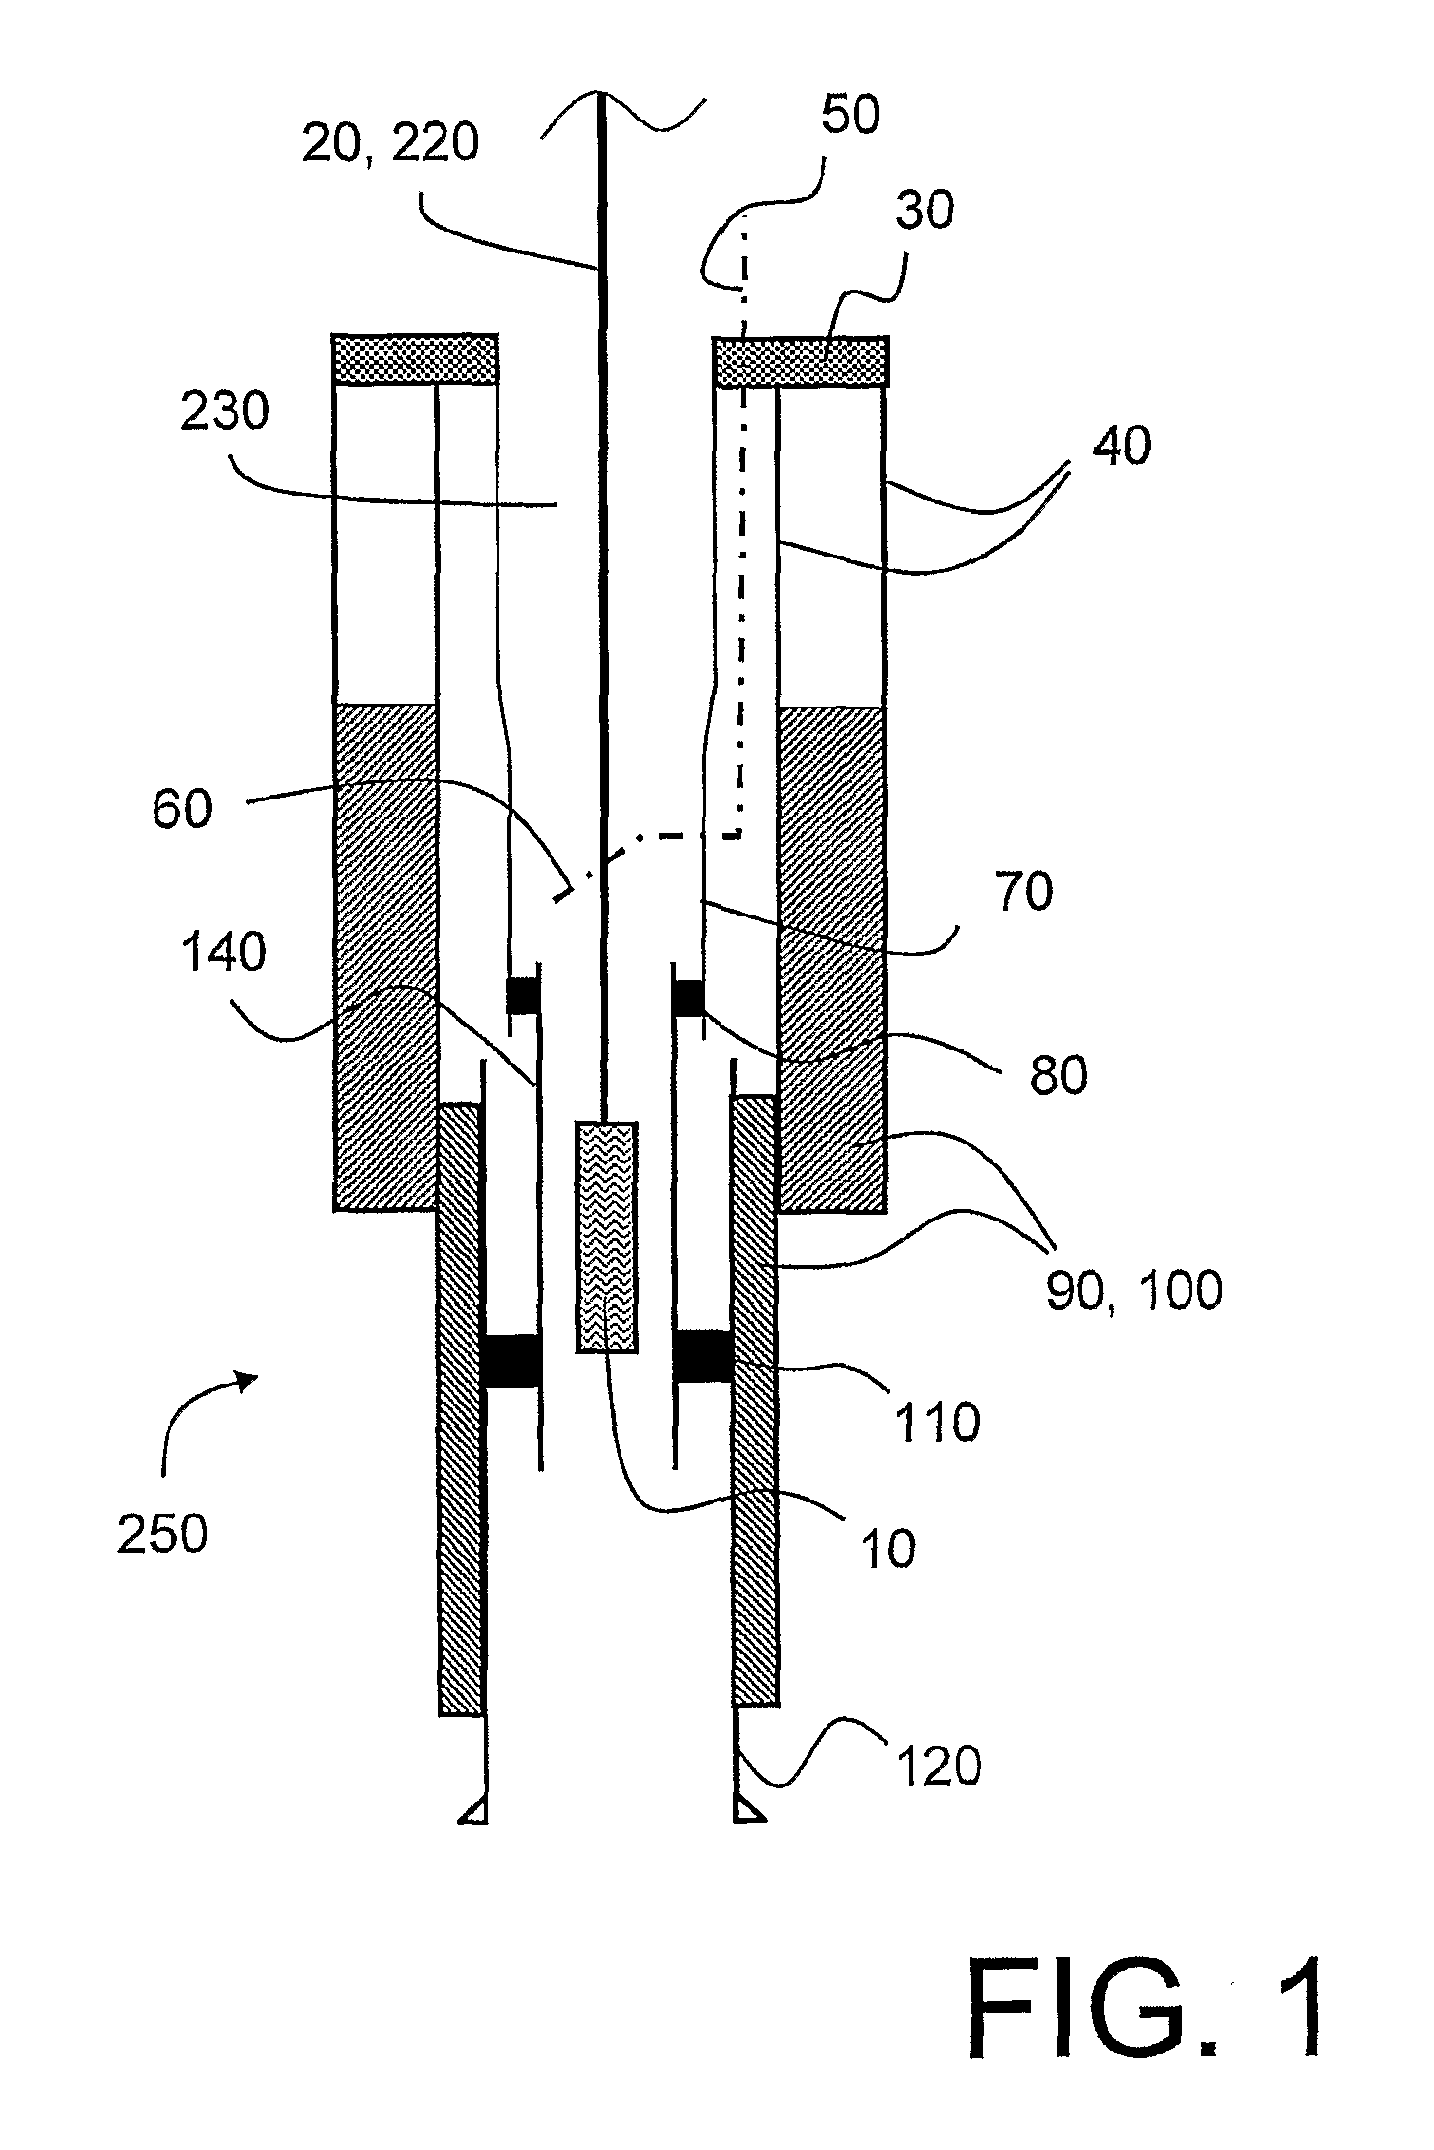 Method and system for registering and measuring leaks and flows